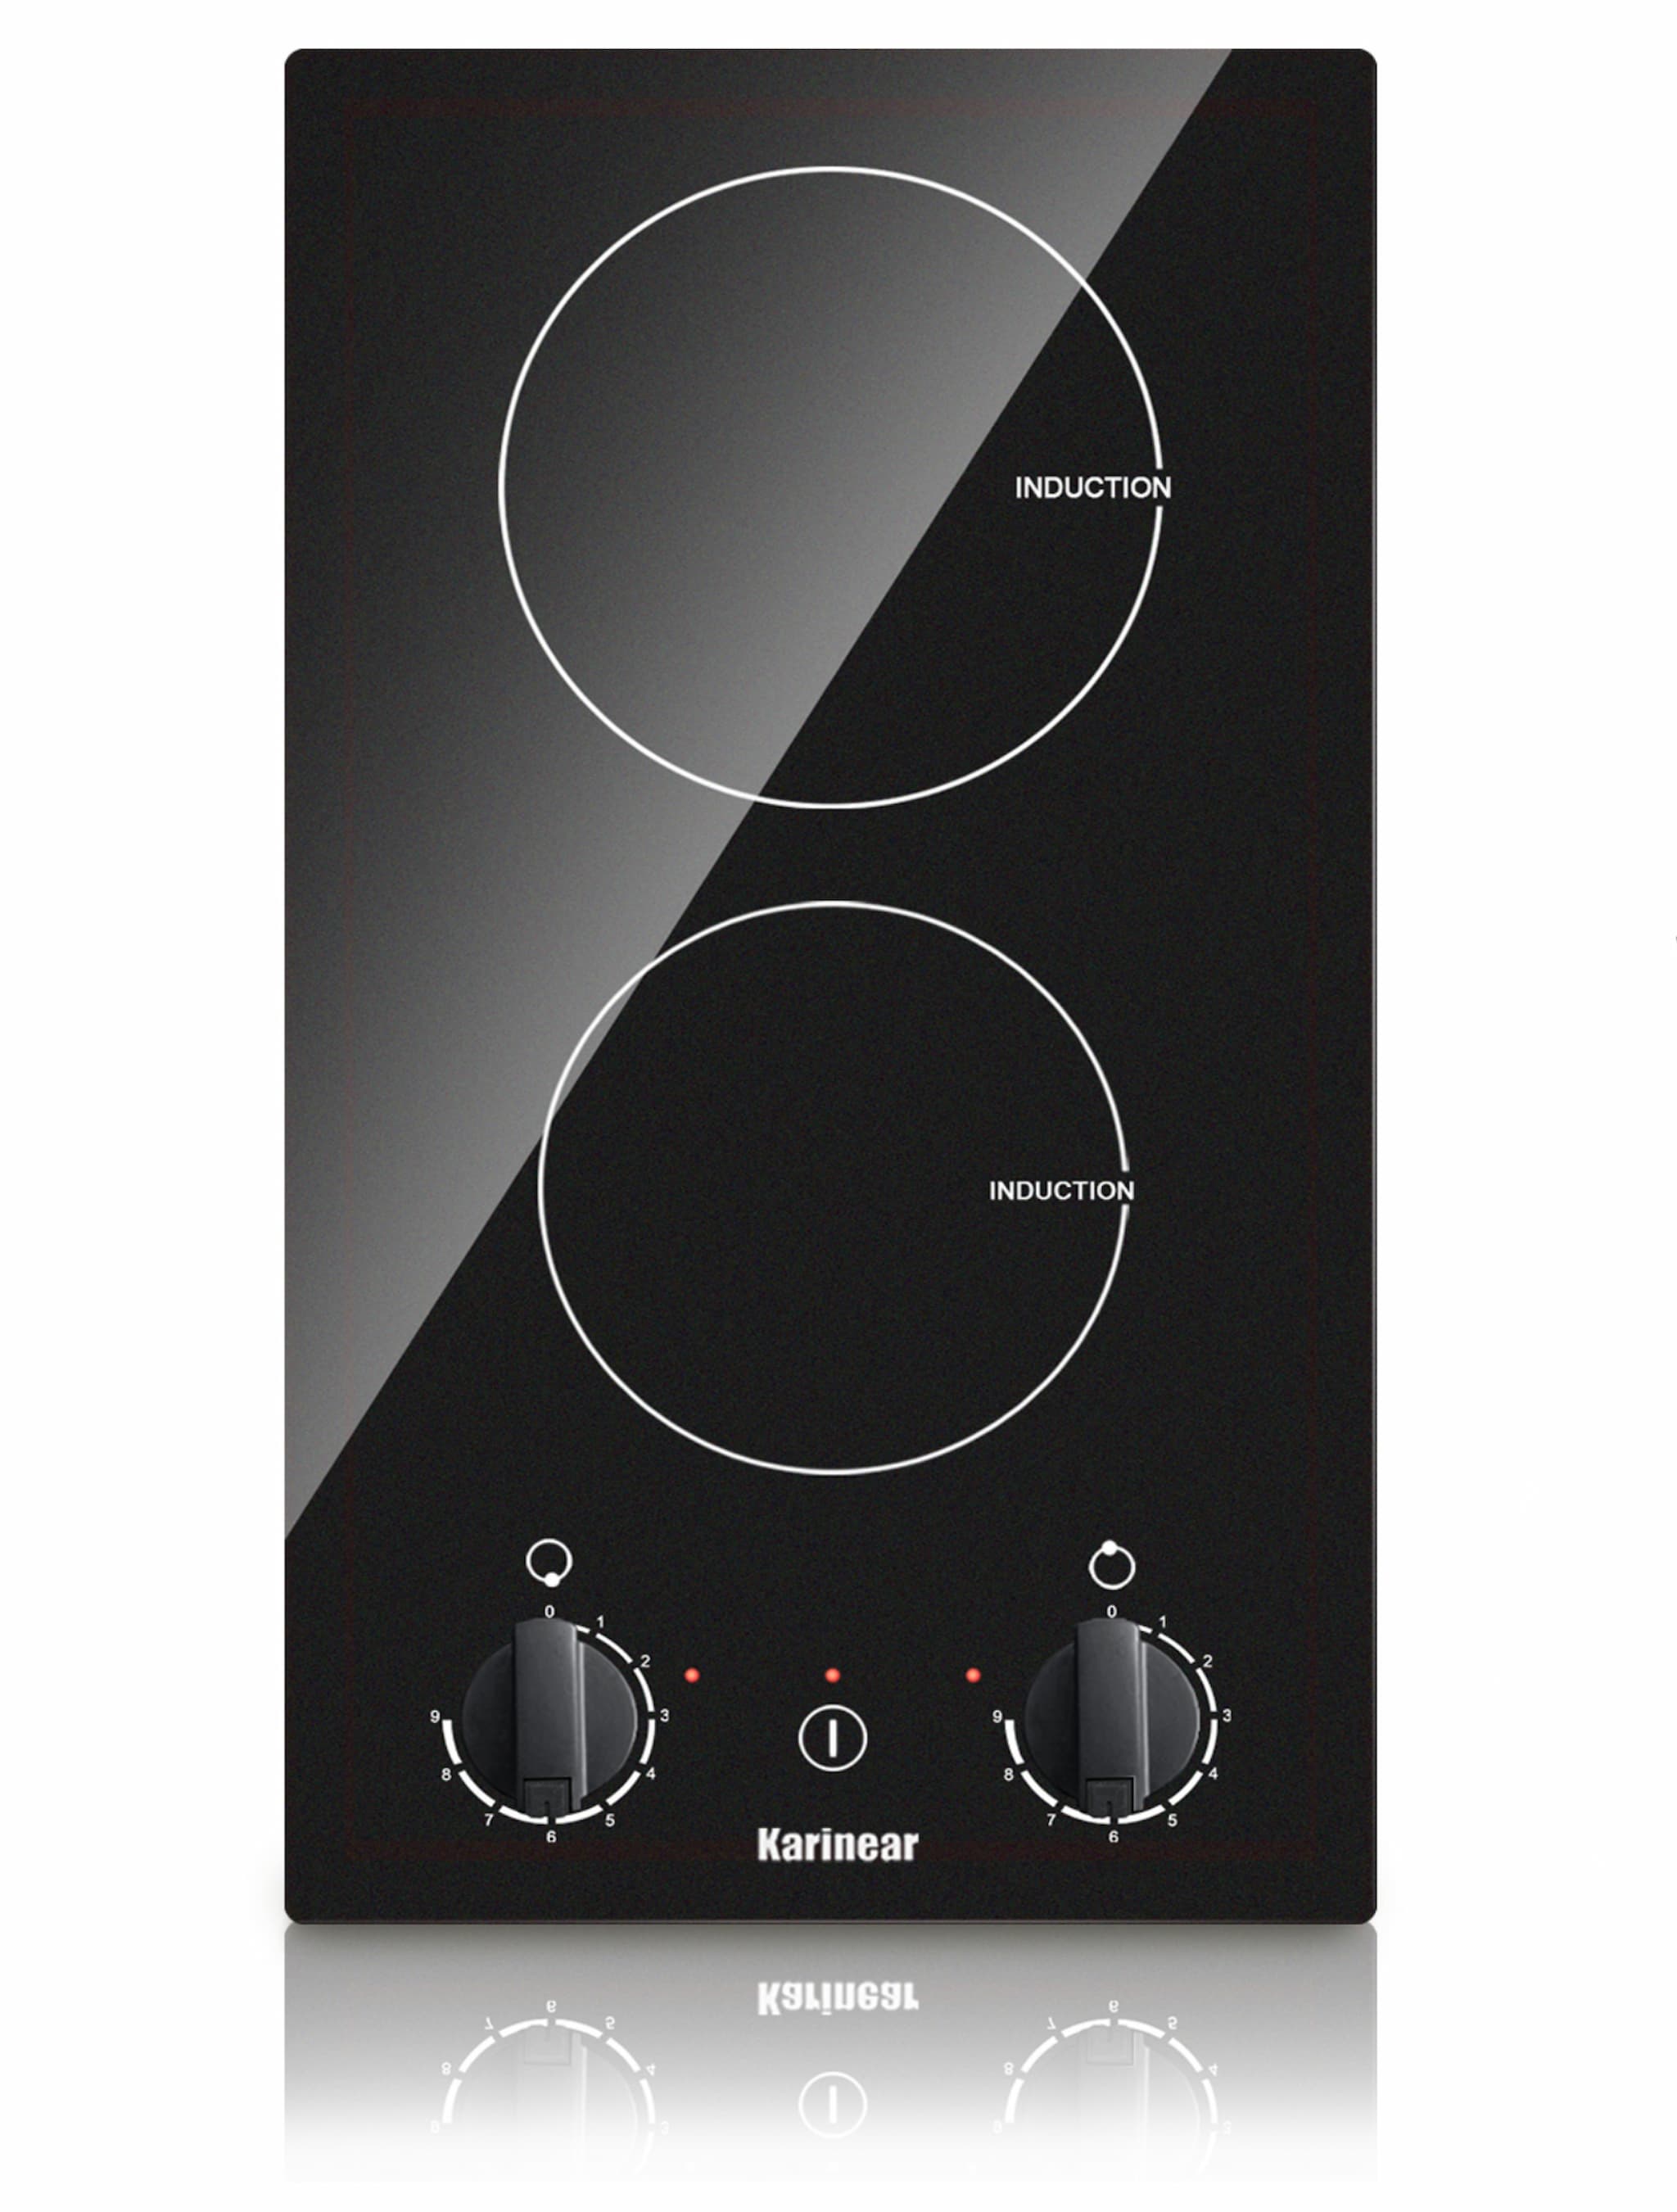 best induction cooktop